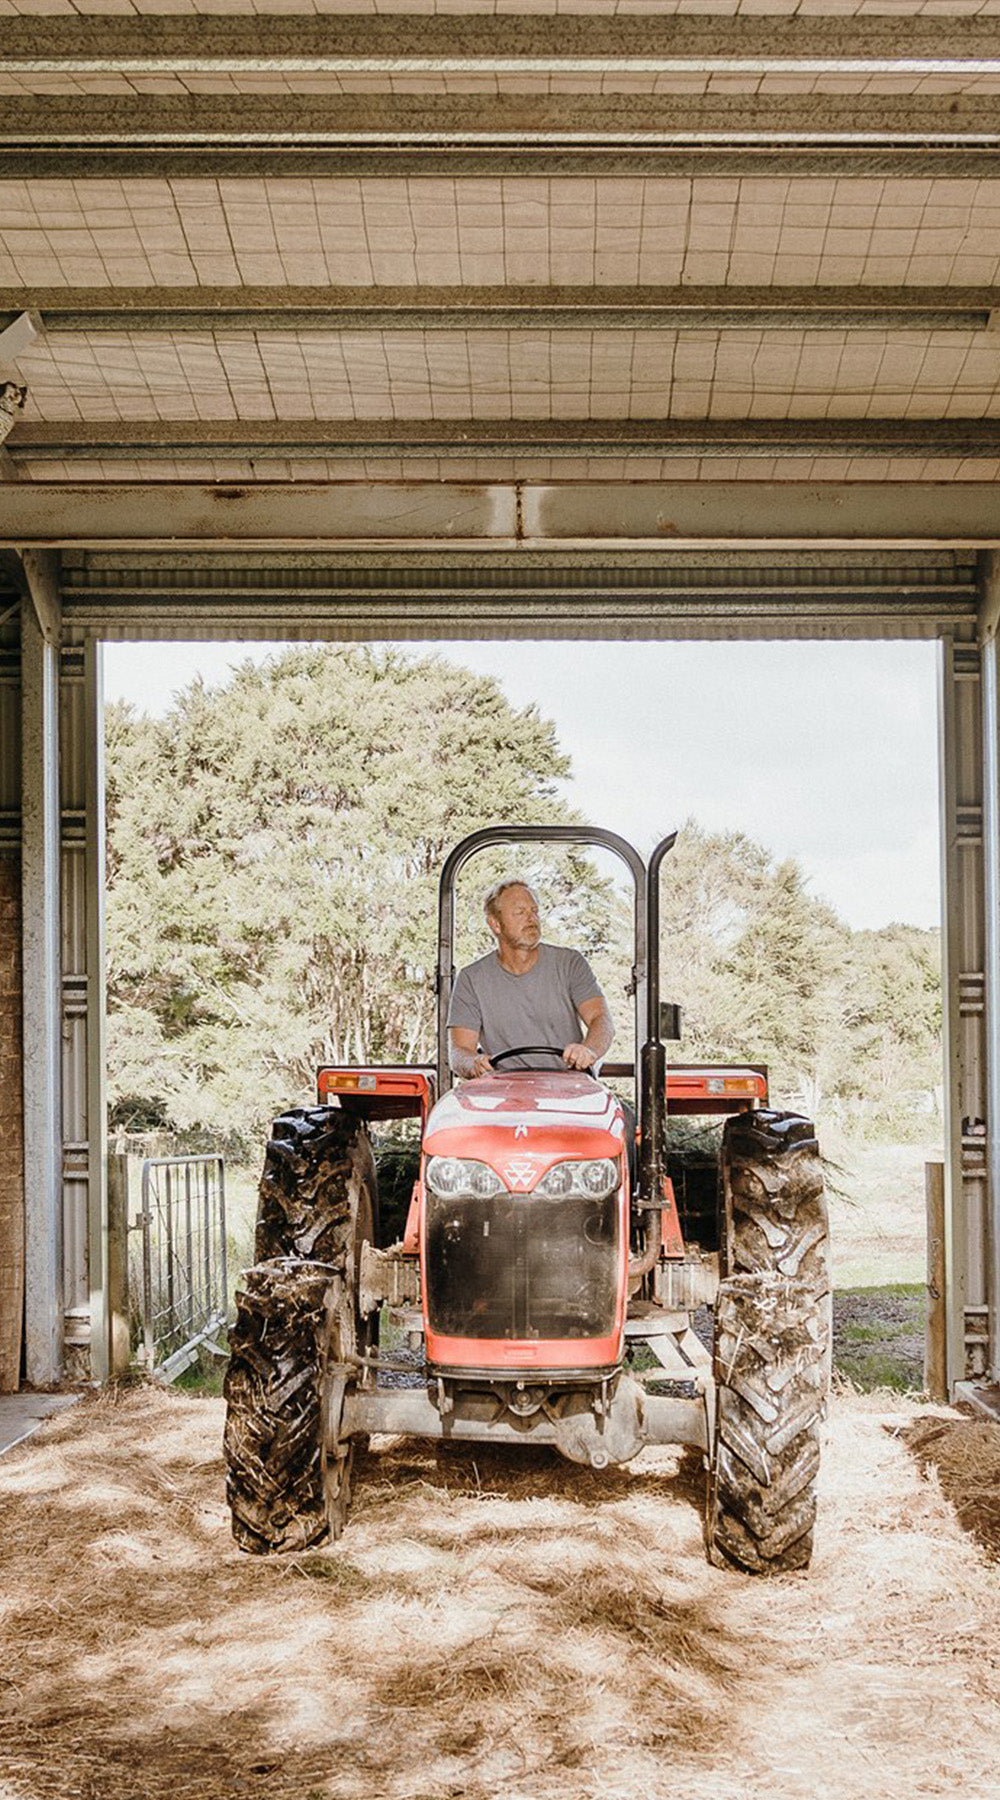  A man on a tractor 